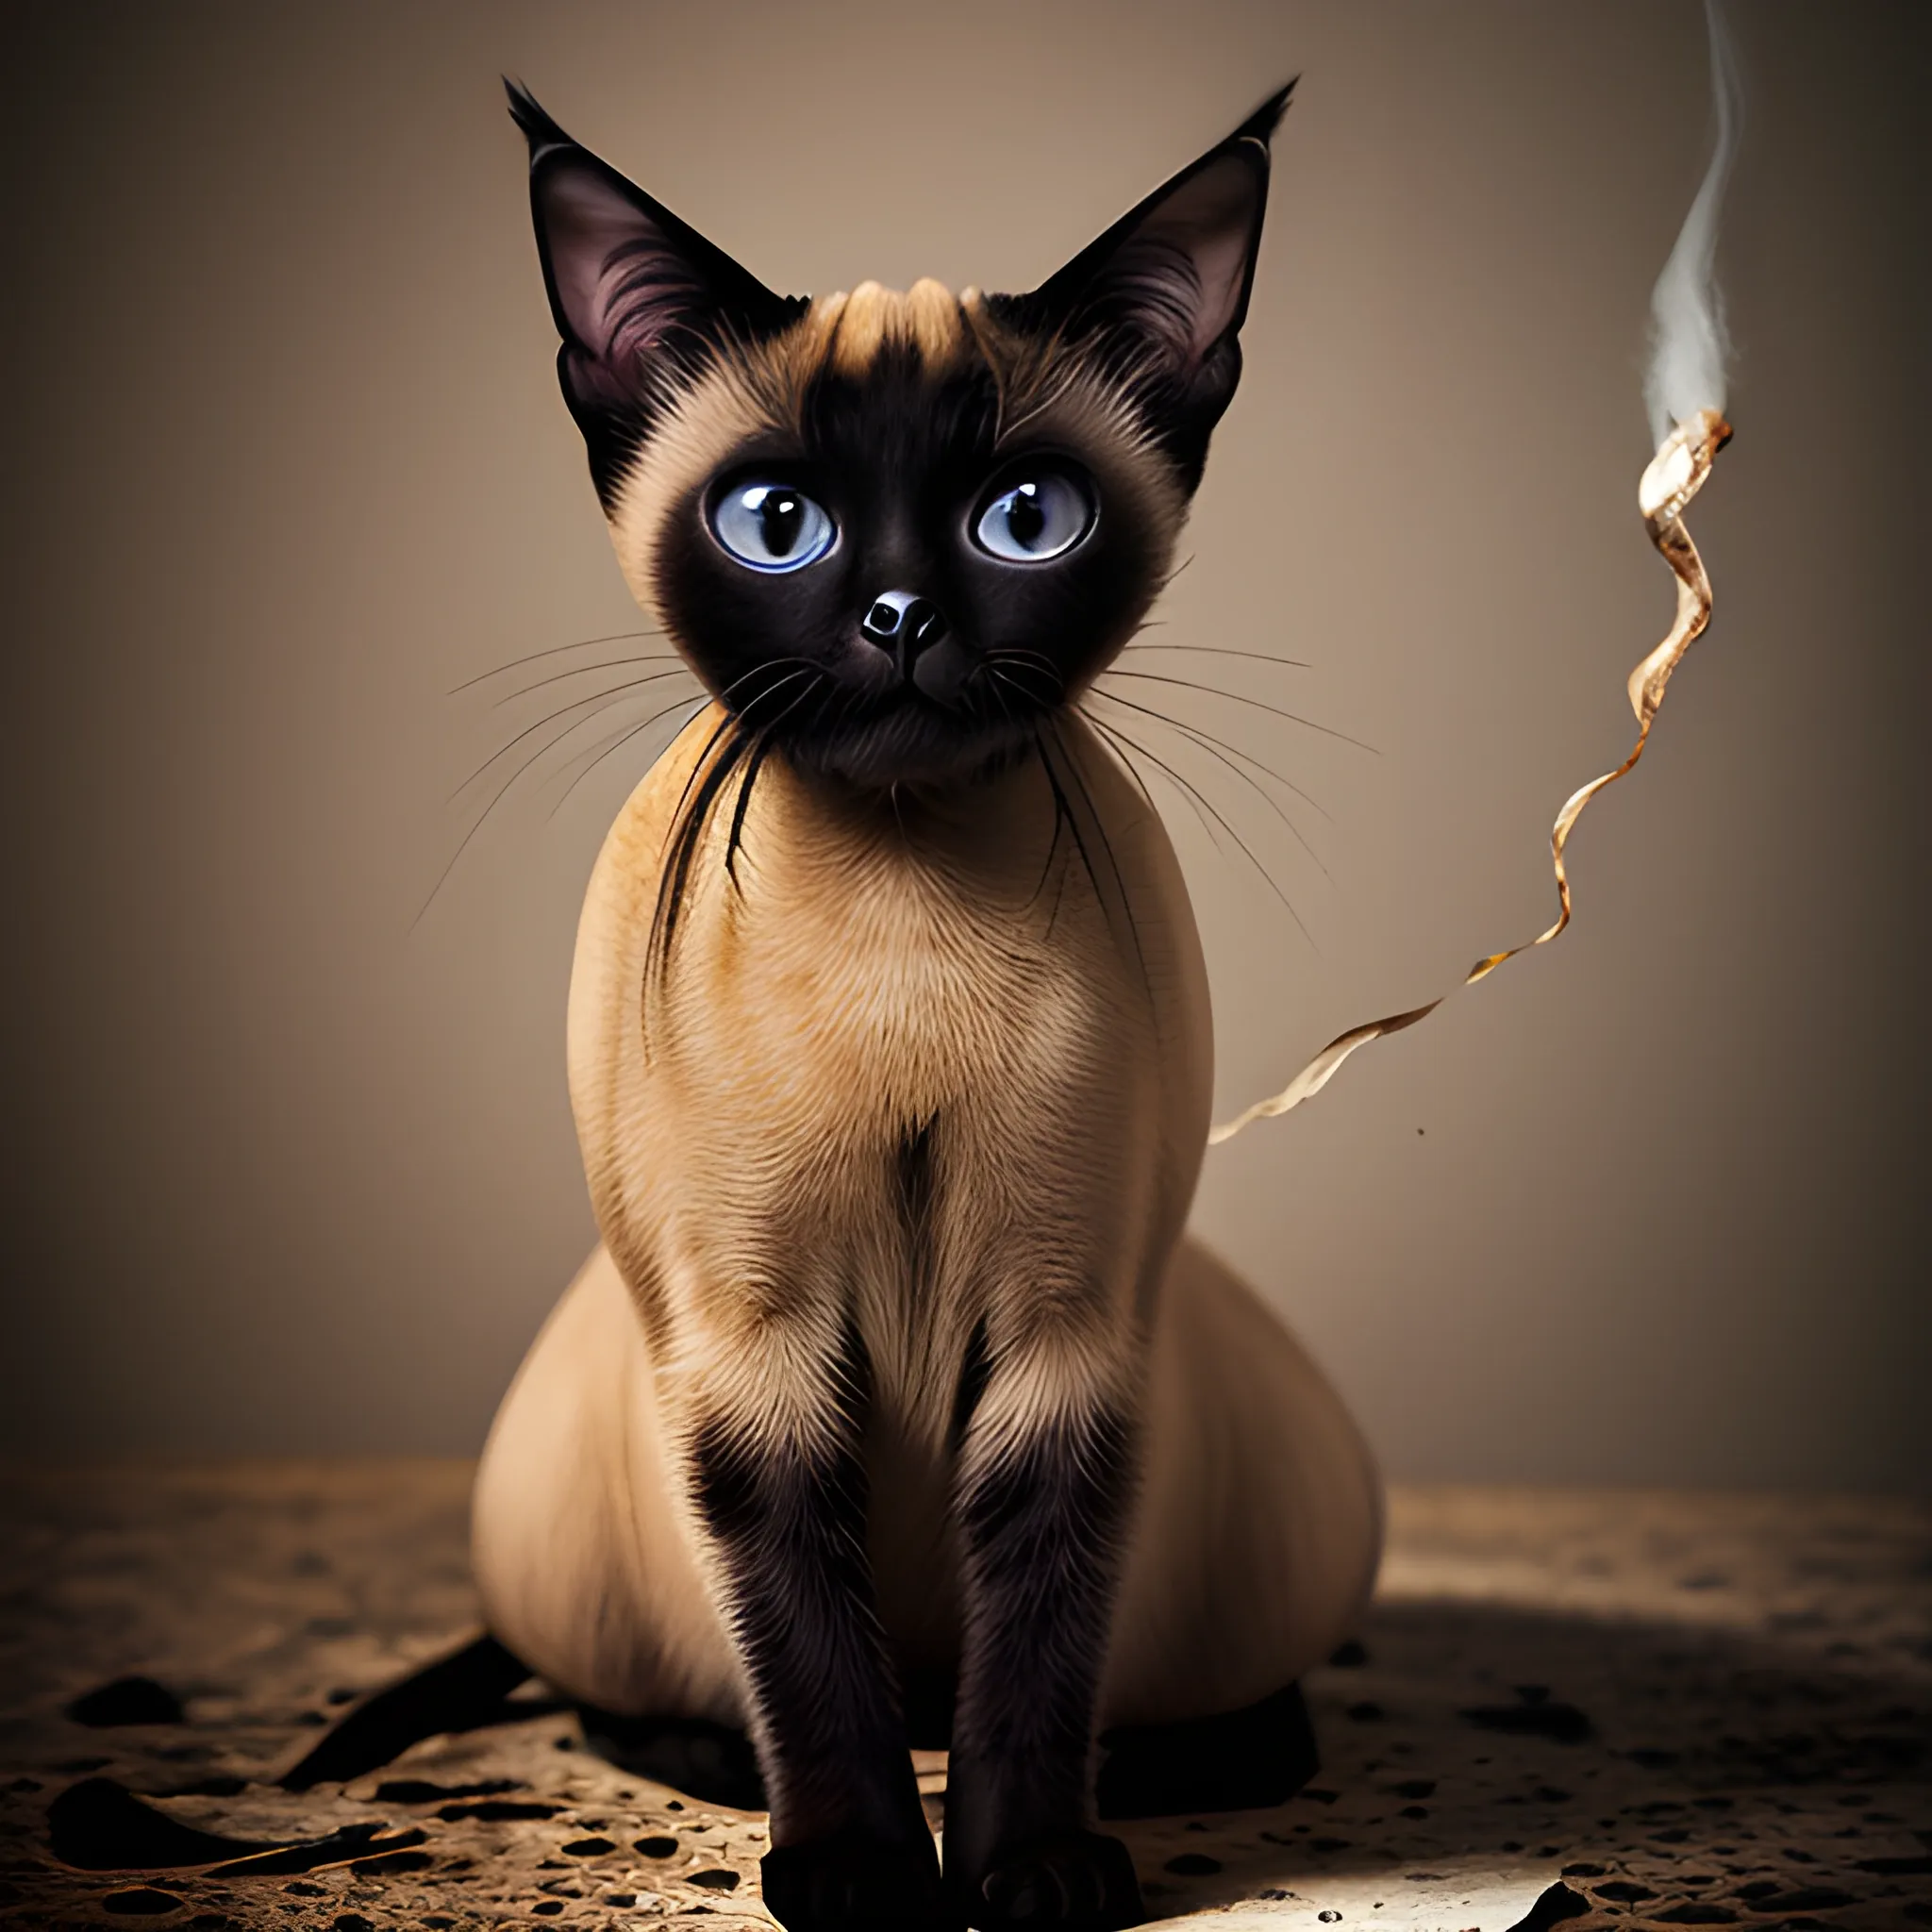 exploded siamese cat, photography